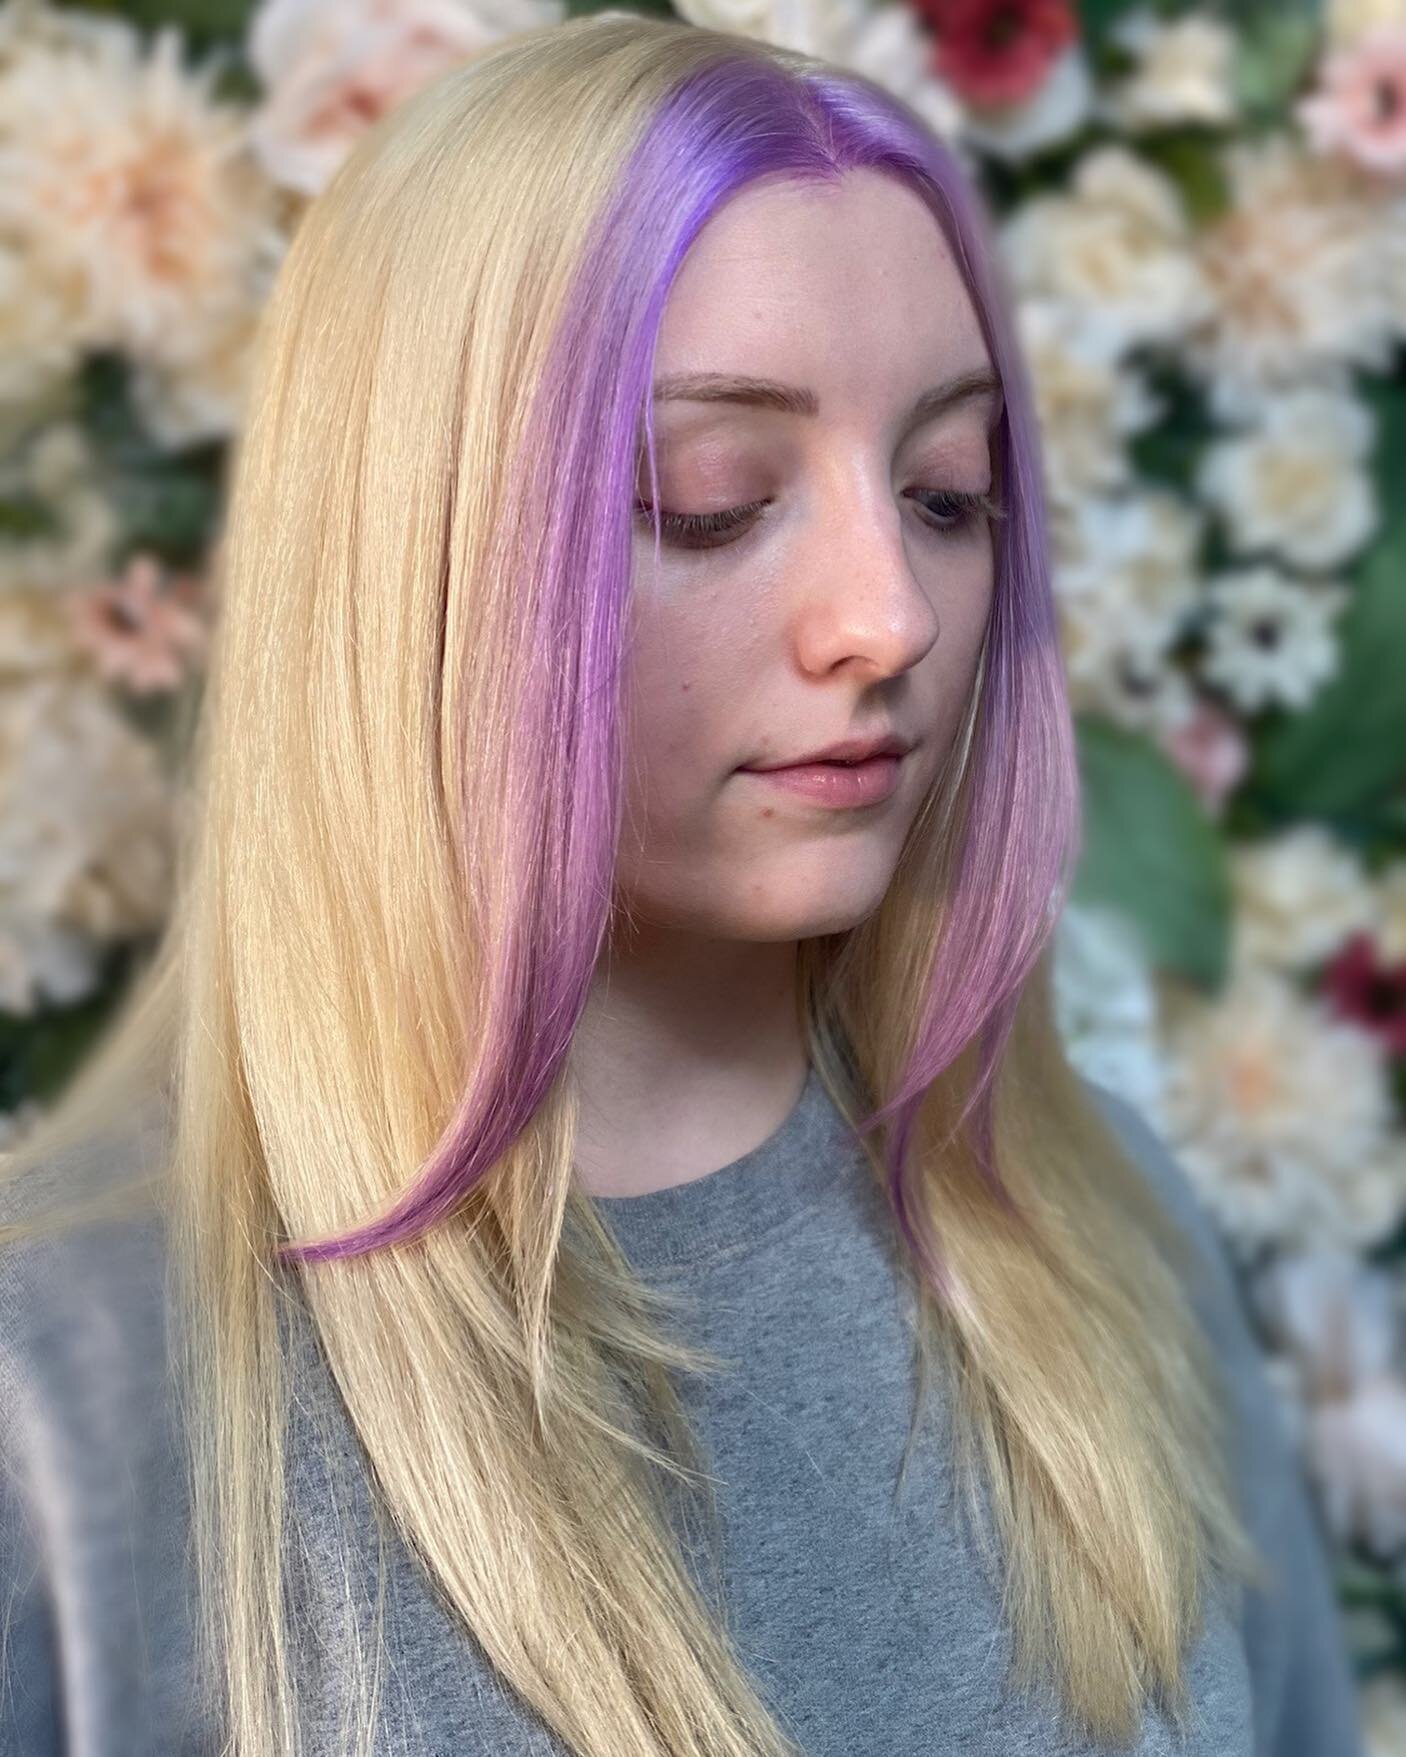 Buttery blonde &amp; purple money chunk 💜
.
.
Color by @fitzannebeauty ✨
.
.
#thewaywardparlor #southsideatlhair #atlhaircolor #westendbestendatl #atlhairwitch #fitzannebeauty #teamwaywardparlor #atlhaircolorist #atlhairmagic #southsideatlhair #east